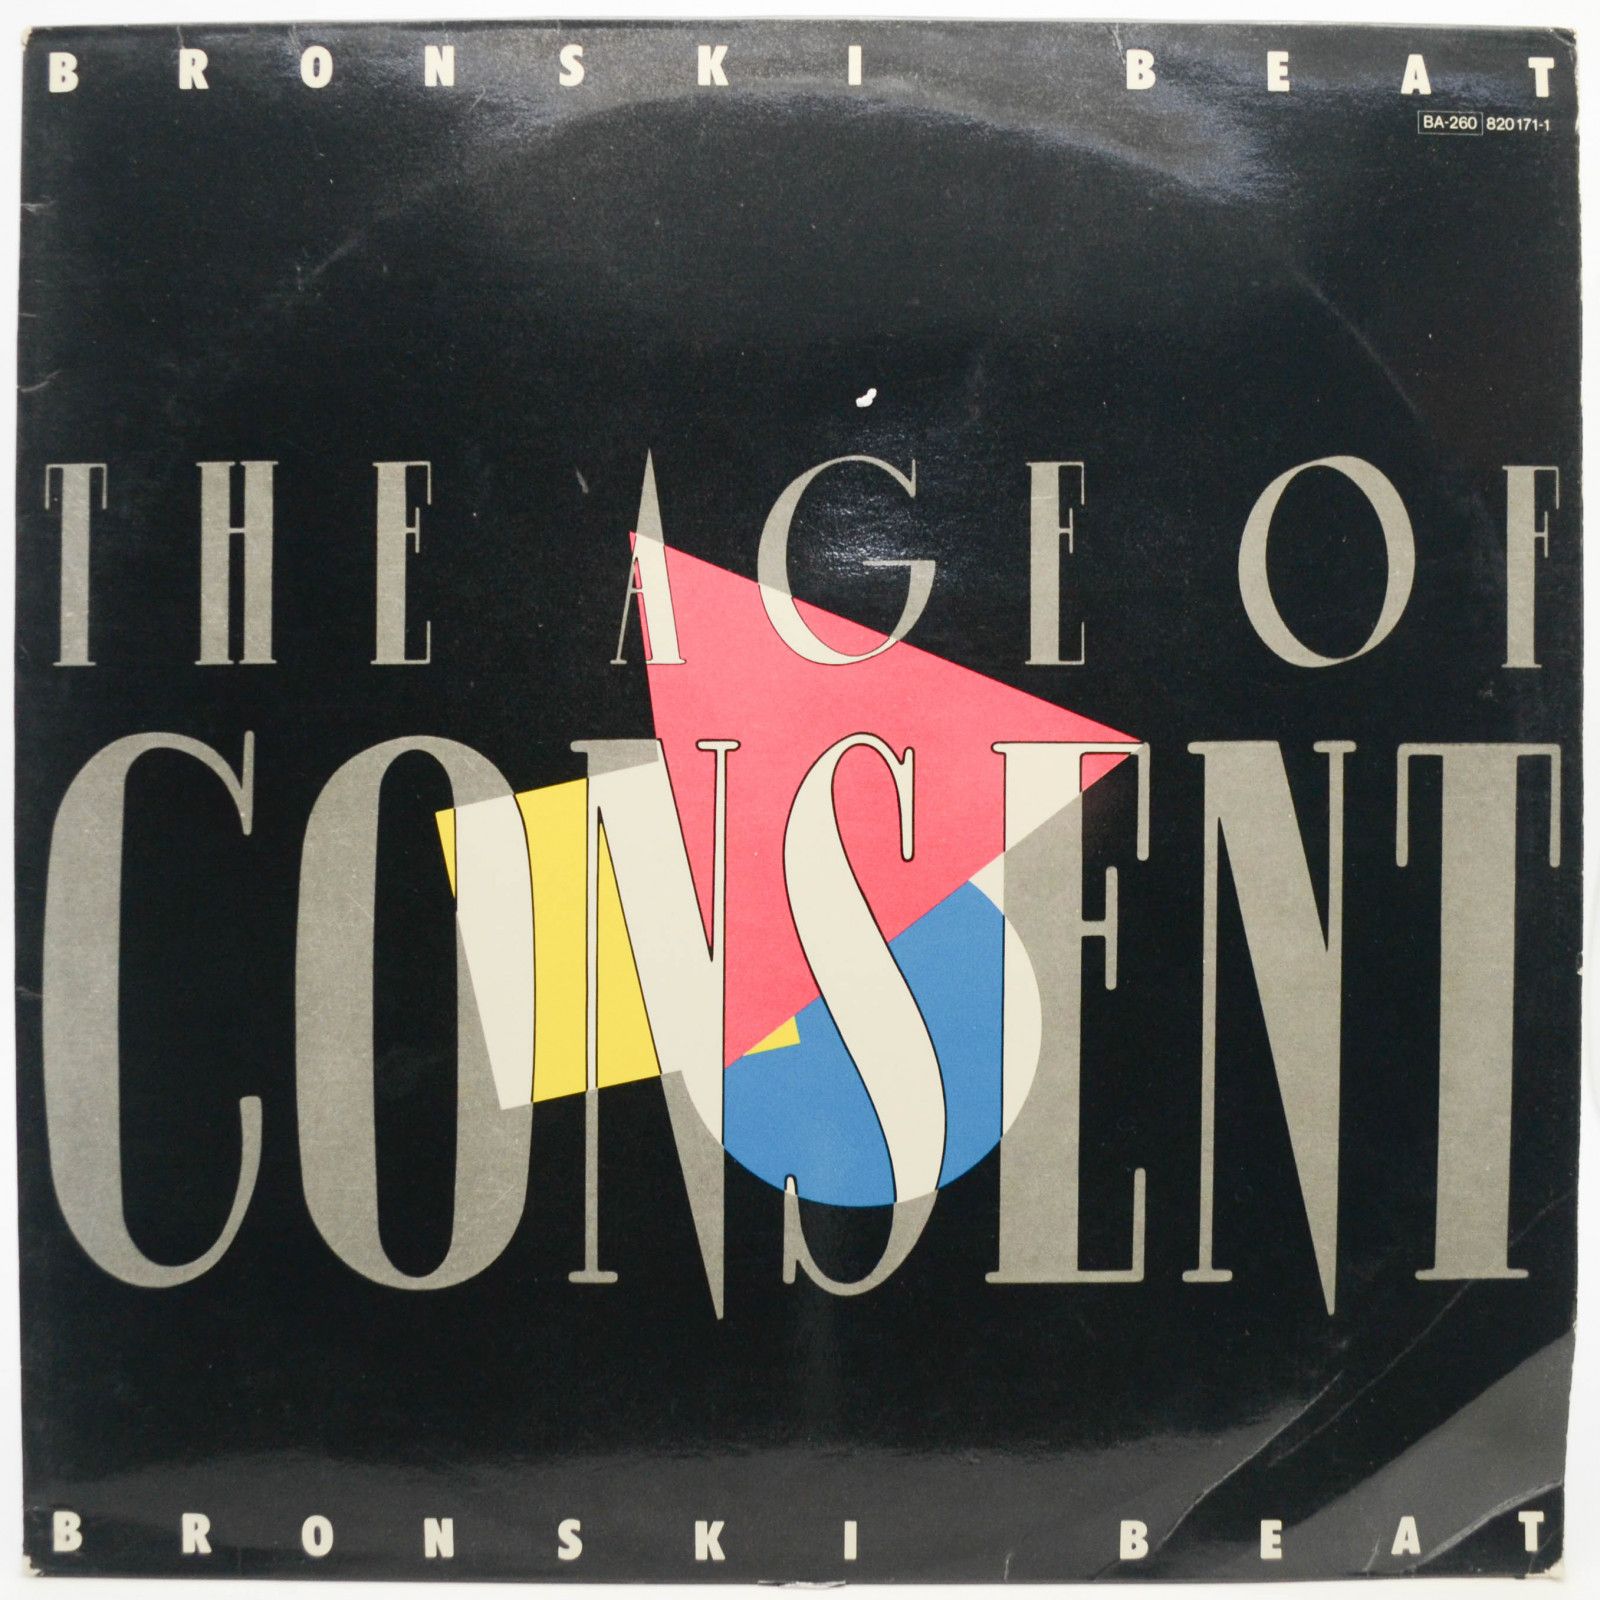 Bronski Beat — The Age Of Consent, 1984